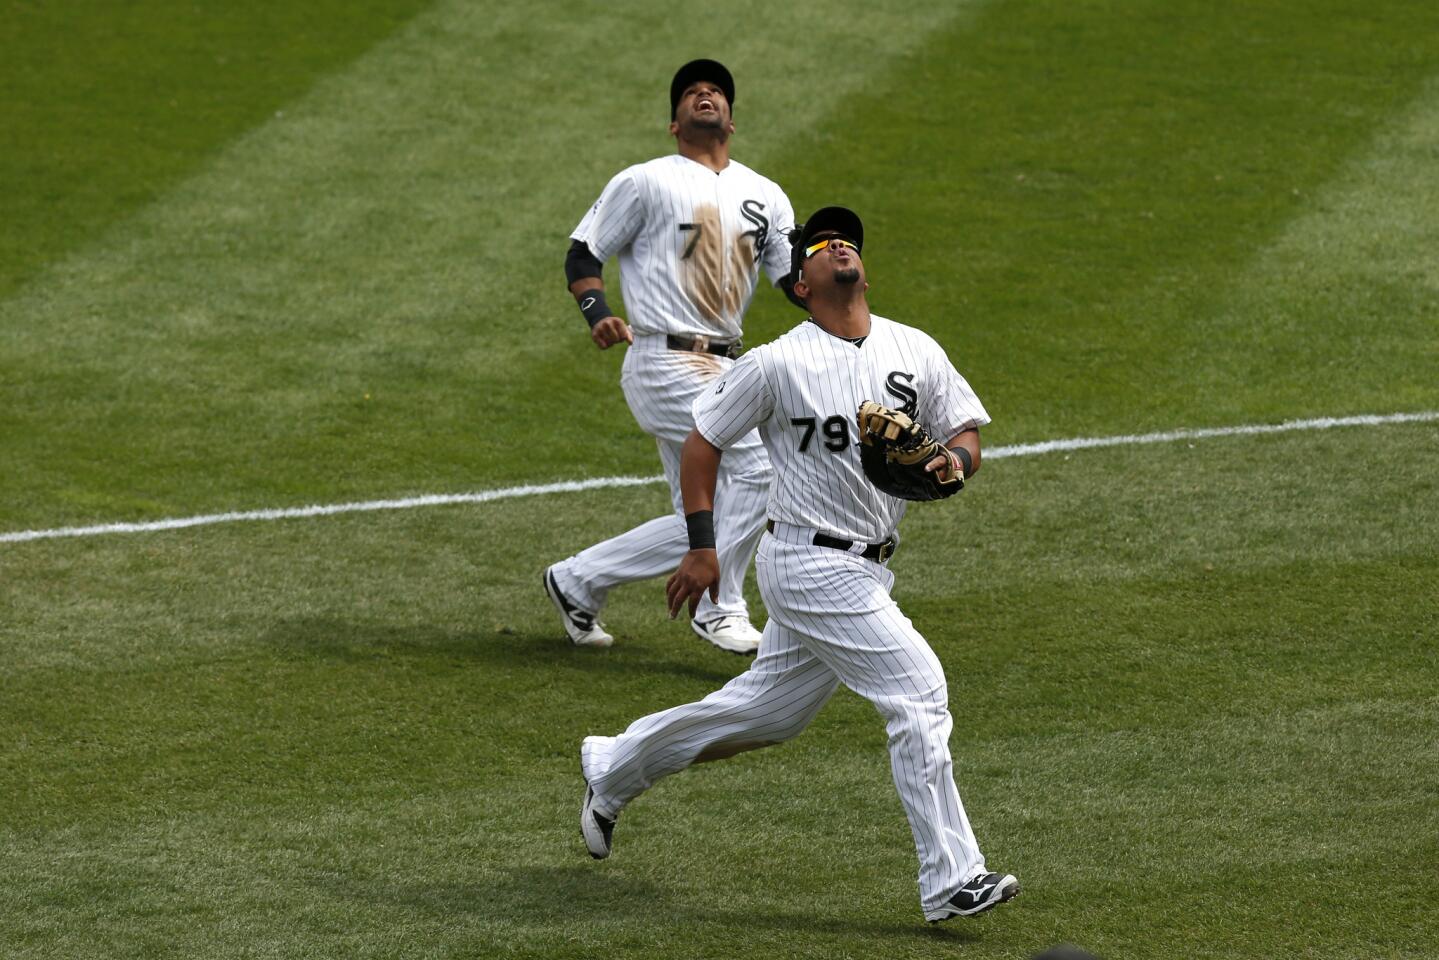 Jose Abreu and Micah Johnson look up for a ball hit in foul territory in the third inning.